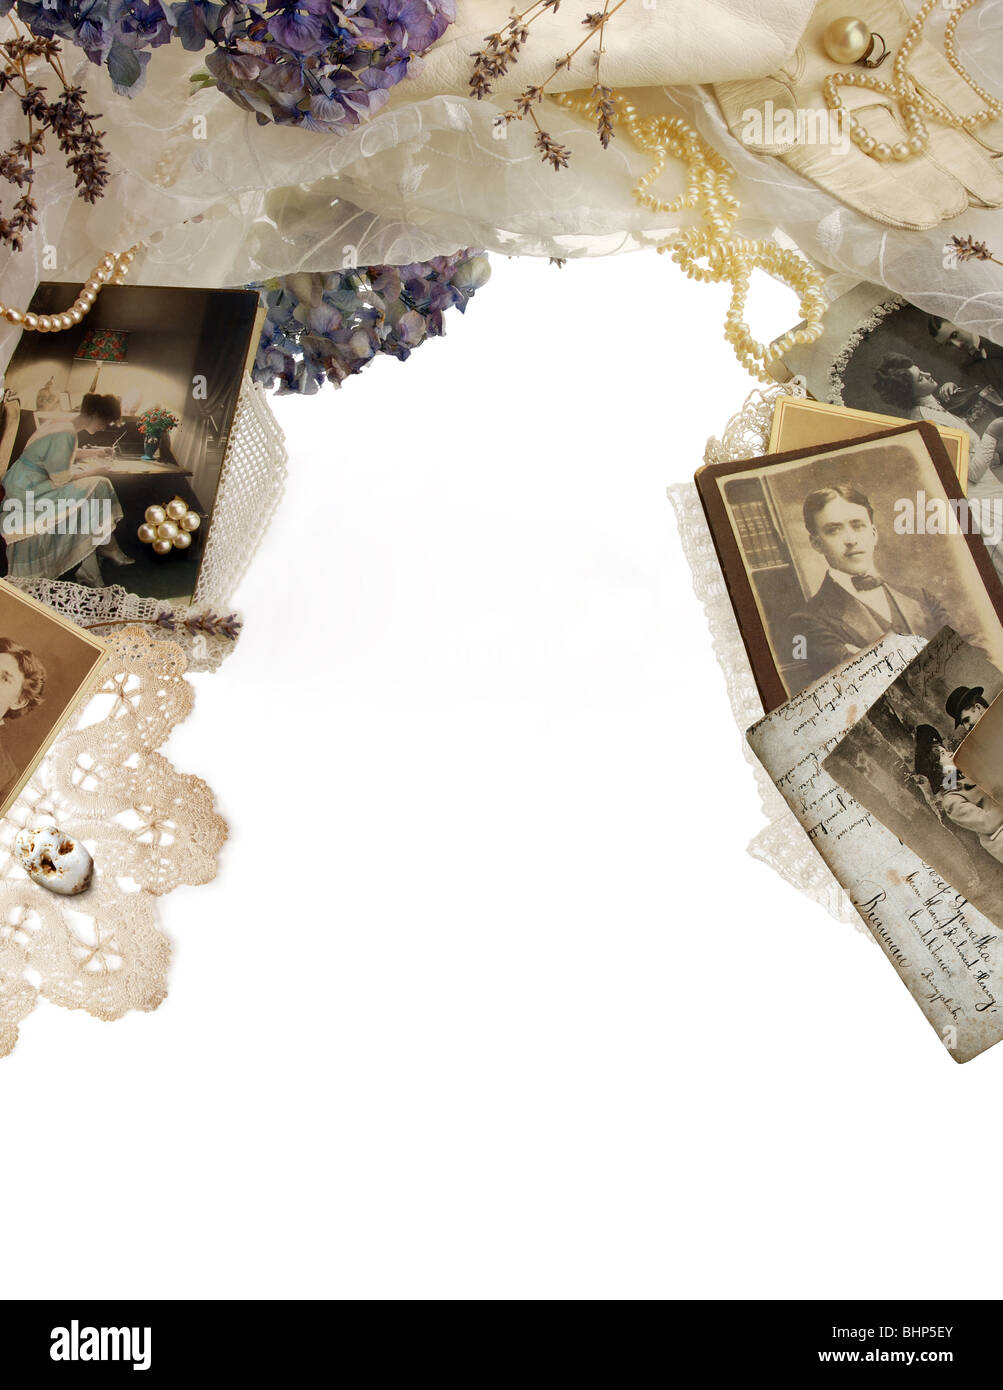 Vintage bordering with photographs, dried flowers and pearls Stock Photo